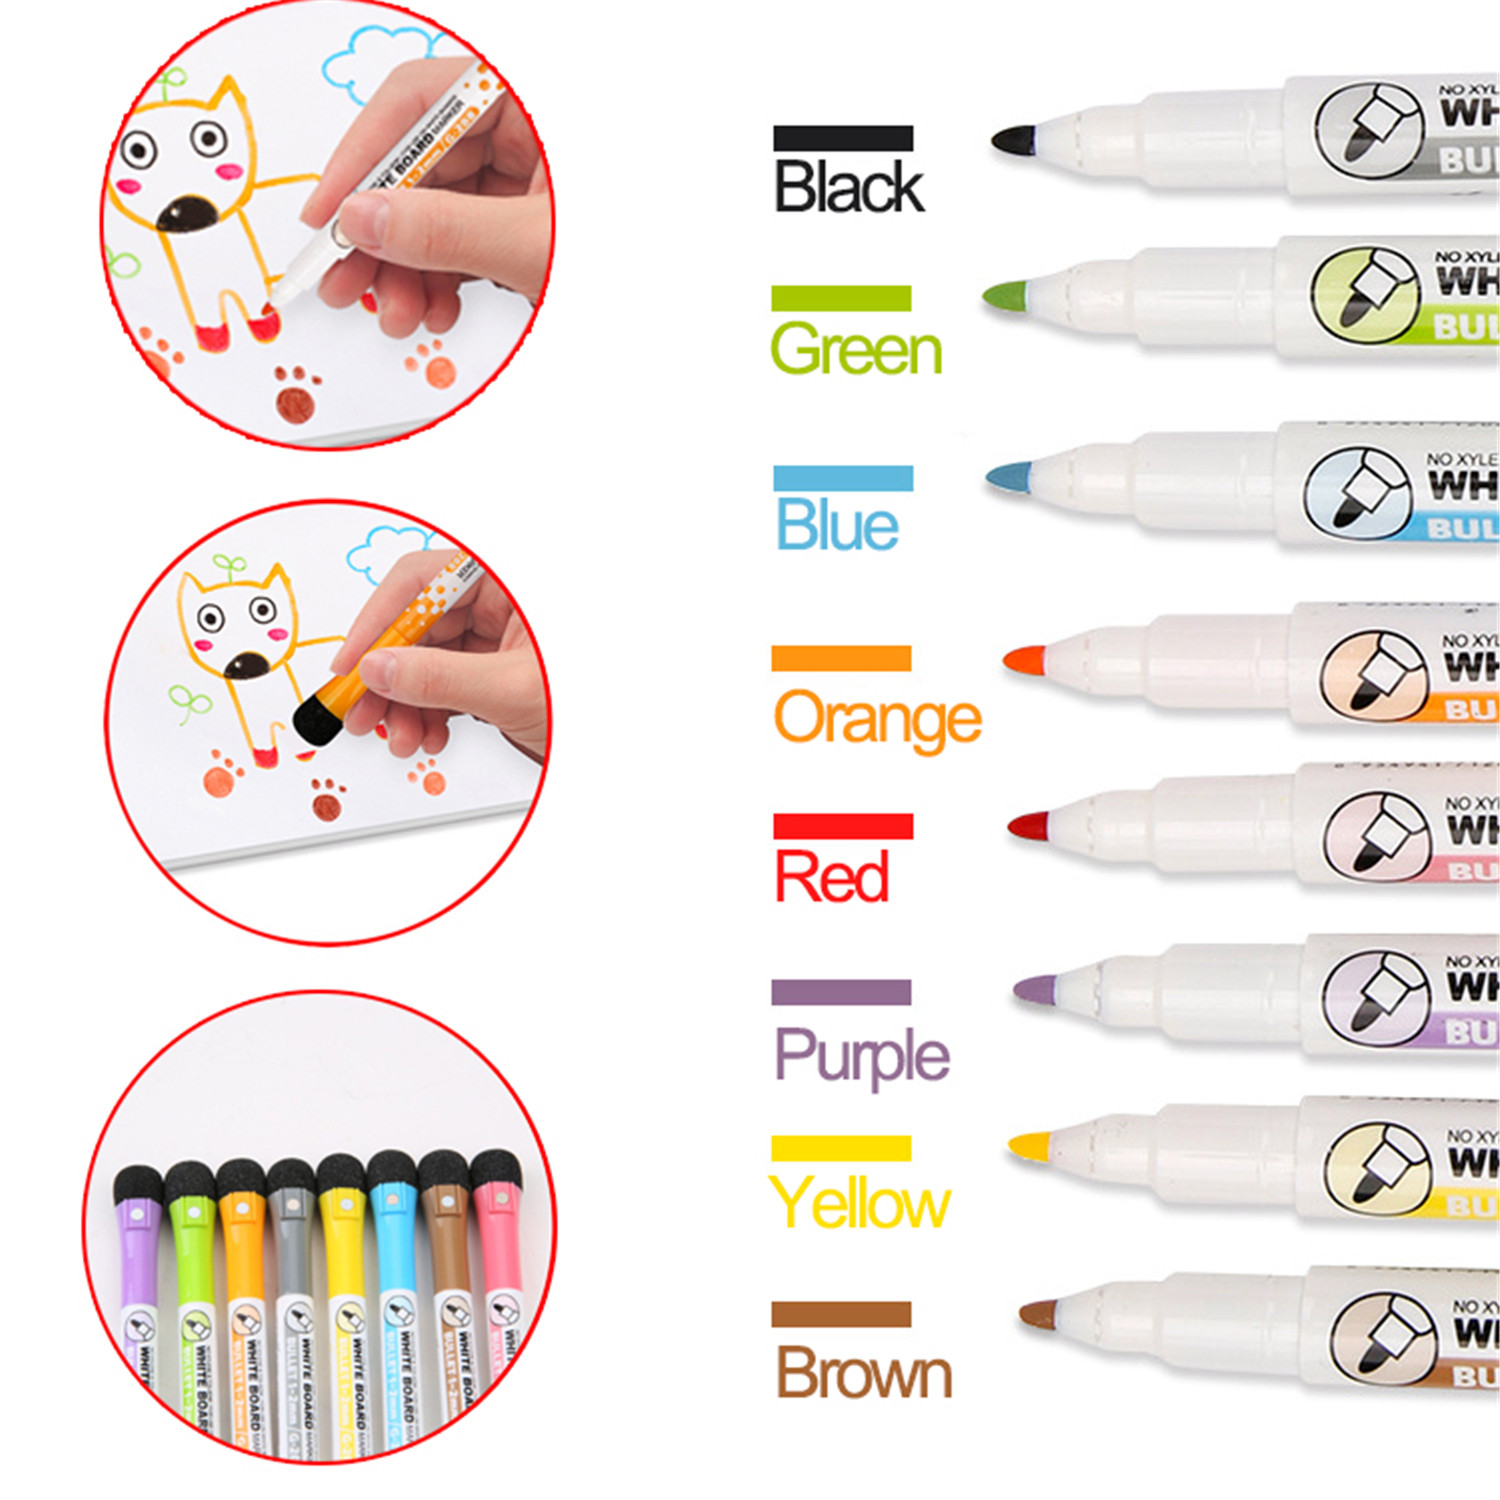 Whiteboard Pen , 8Pcs/lot Magnetic Drawing and Recording WhiteBoard Markers Pen Magnet Erasable Dry Office School Supplies